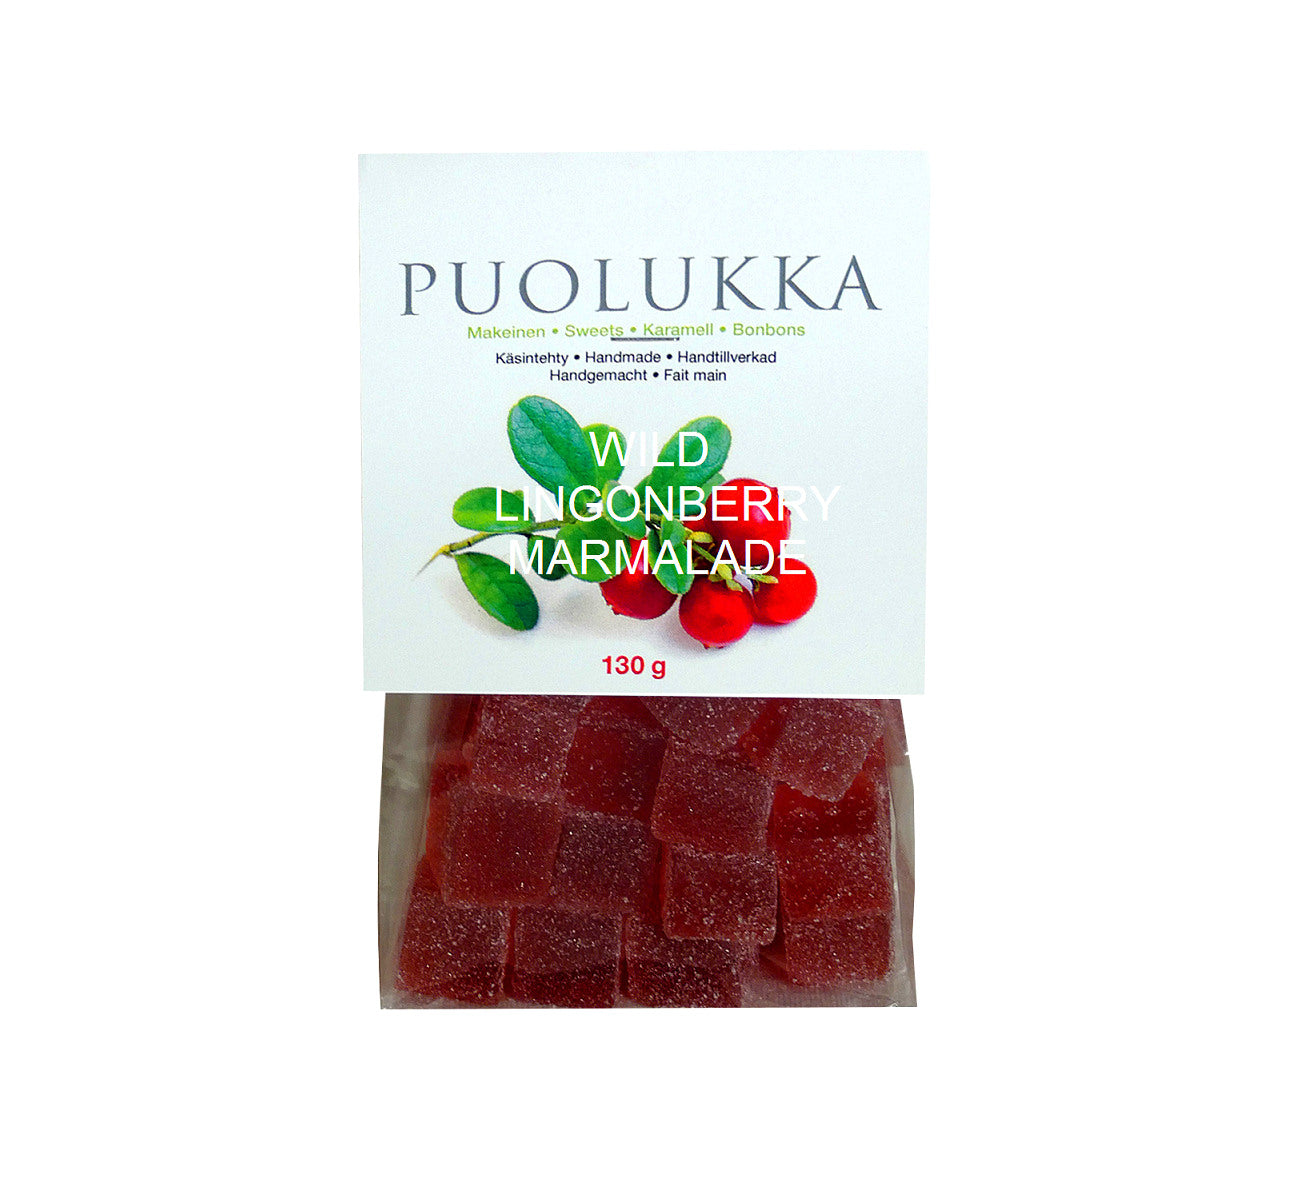 Bag of natural wild lingonberry sweets, 130 g, artisan handmade from pure wild Lapland lingonberries in Finland.